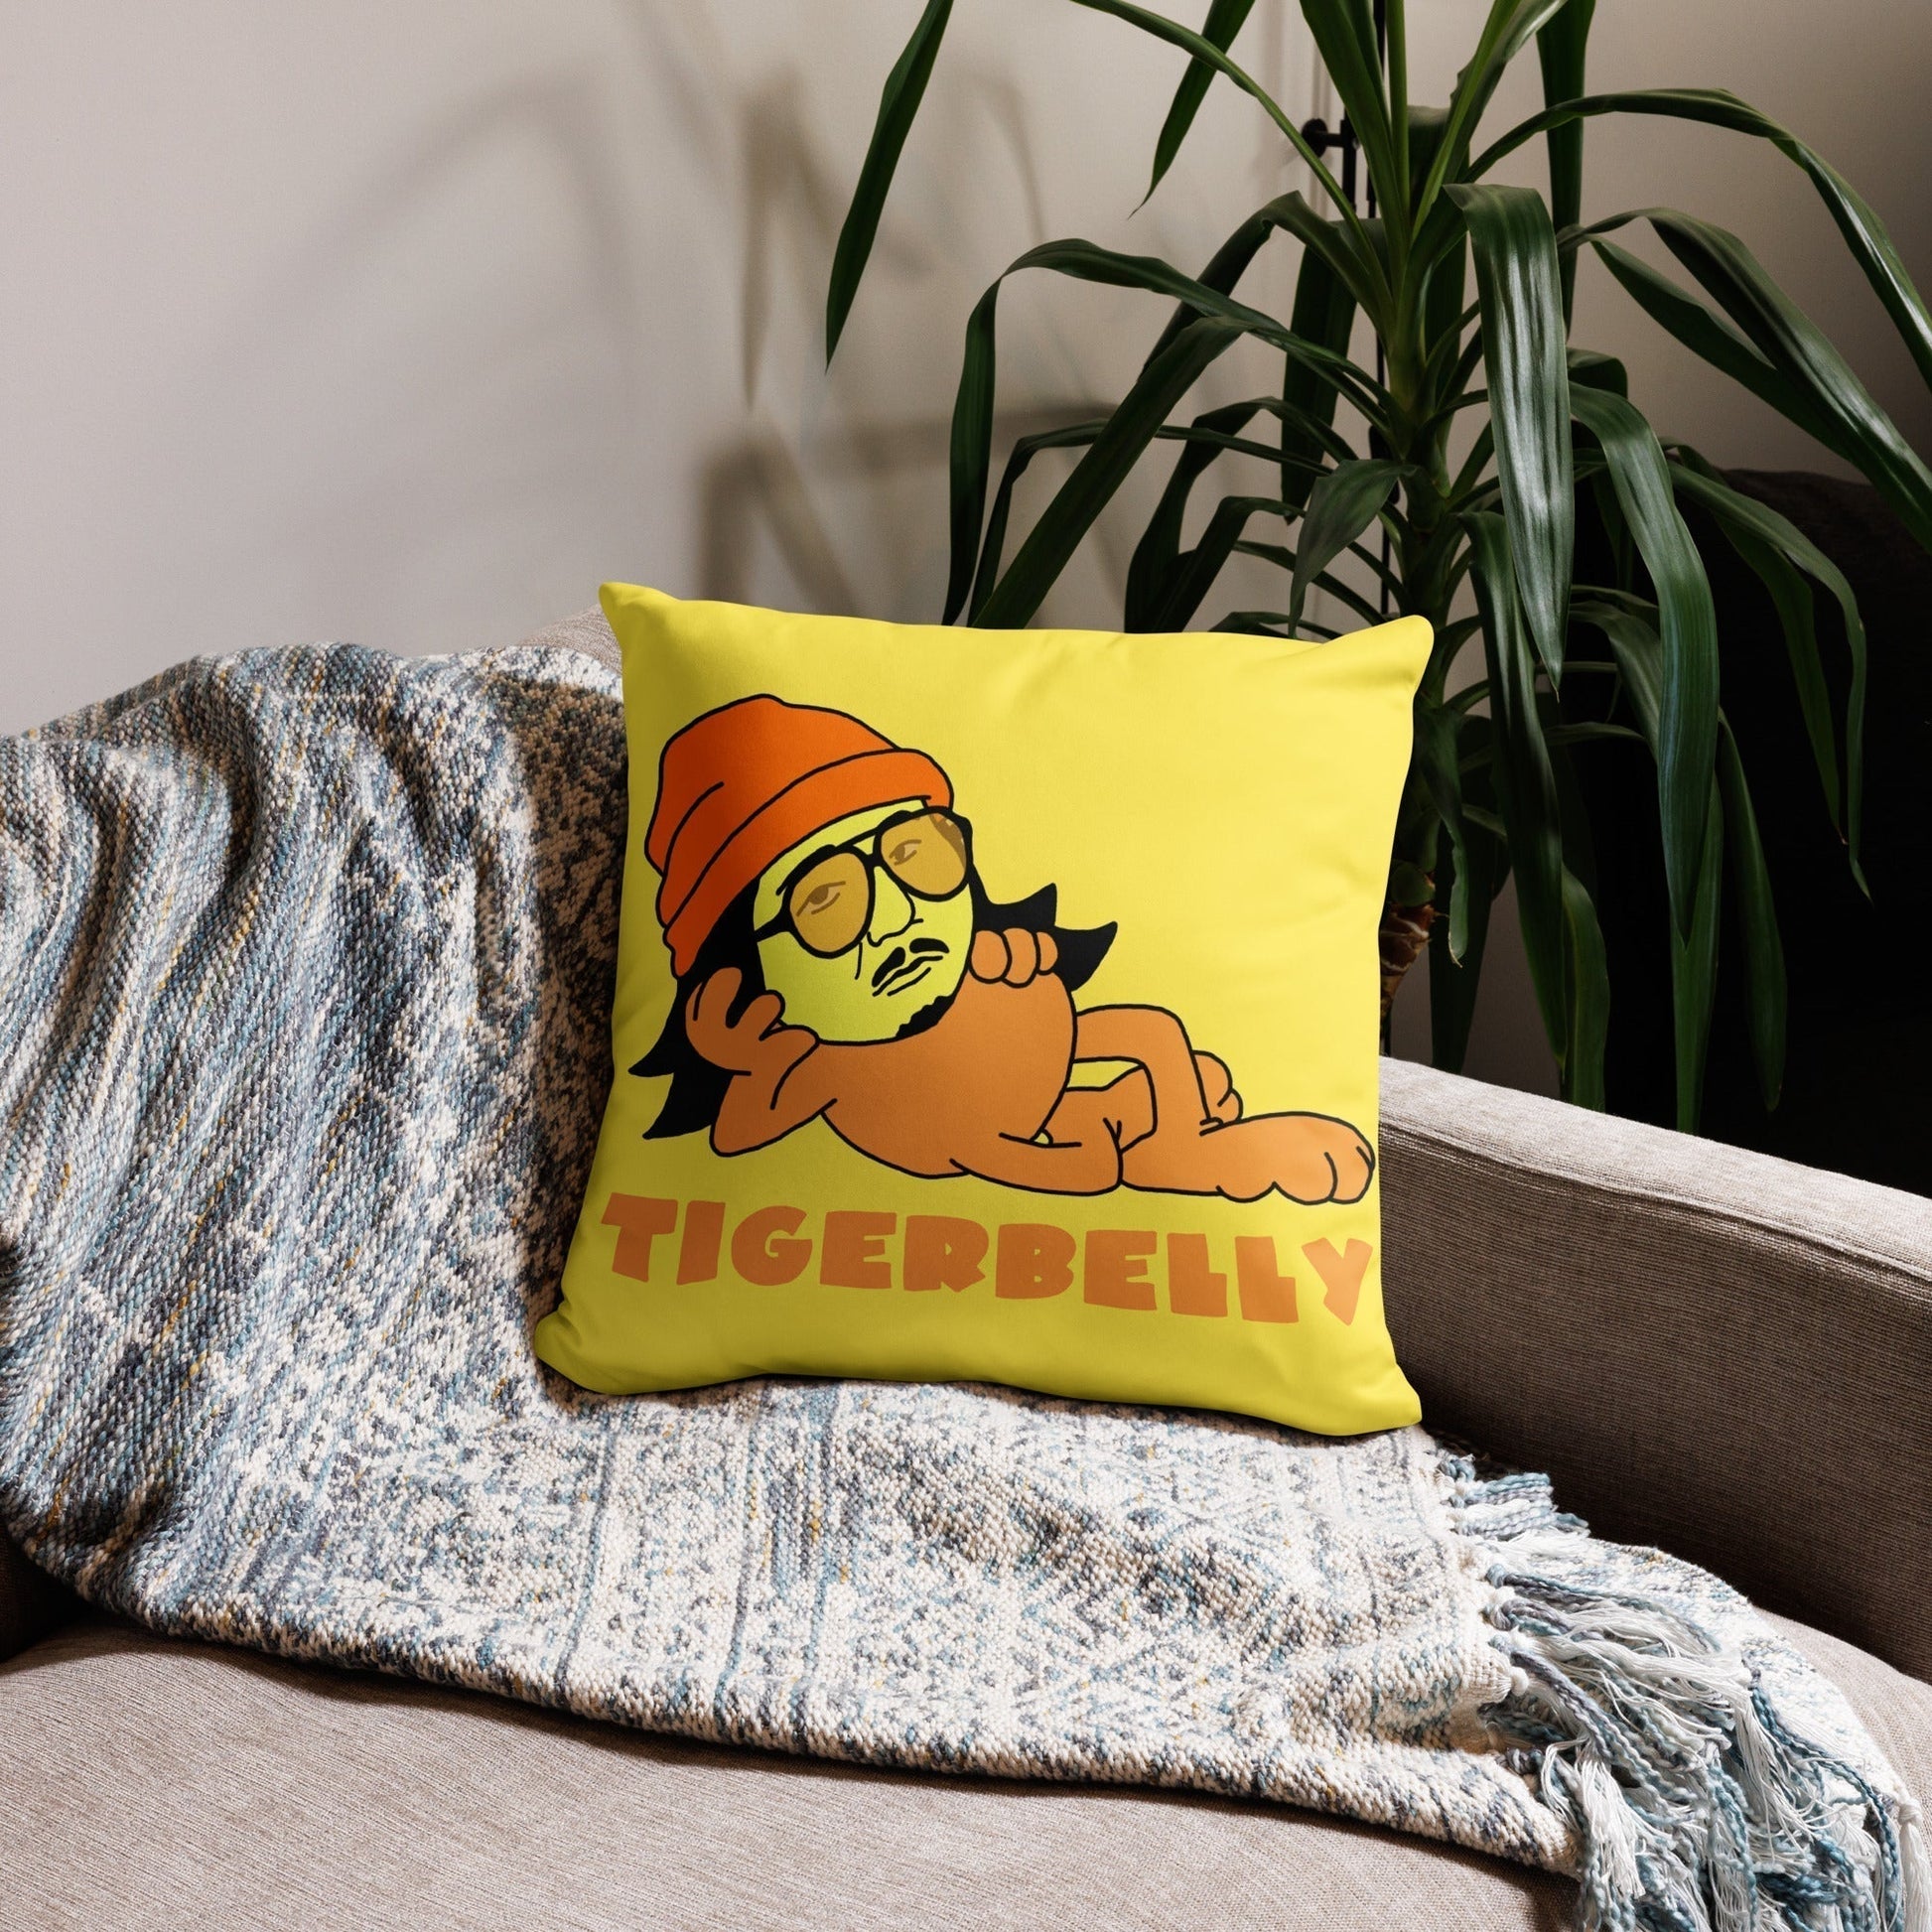 Bobby Lee Tigerbelly, Bobby Lee Merch, Tigerbelly Merch, Bobby Lee Gift, Funny Tigerbelly Gift, Tigerbelly Podcast, TigerBelly Pillow Next Cult Brand Bobby Lee, Podcasts, Stand-up Comedy, TigerBelly